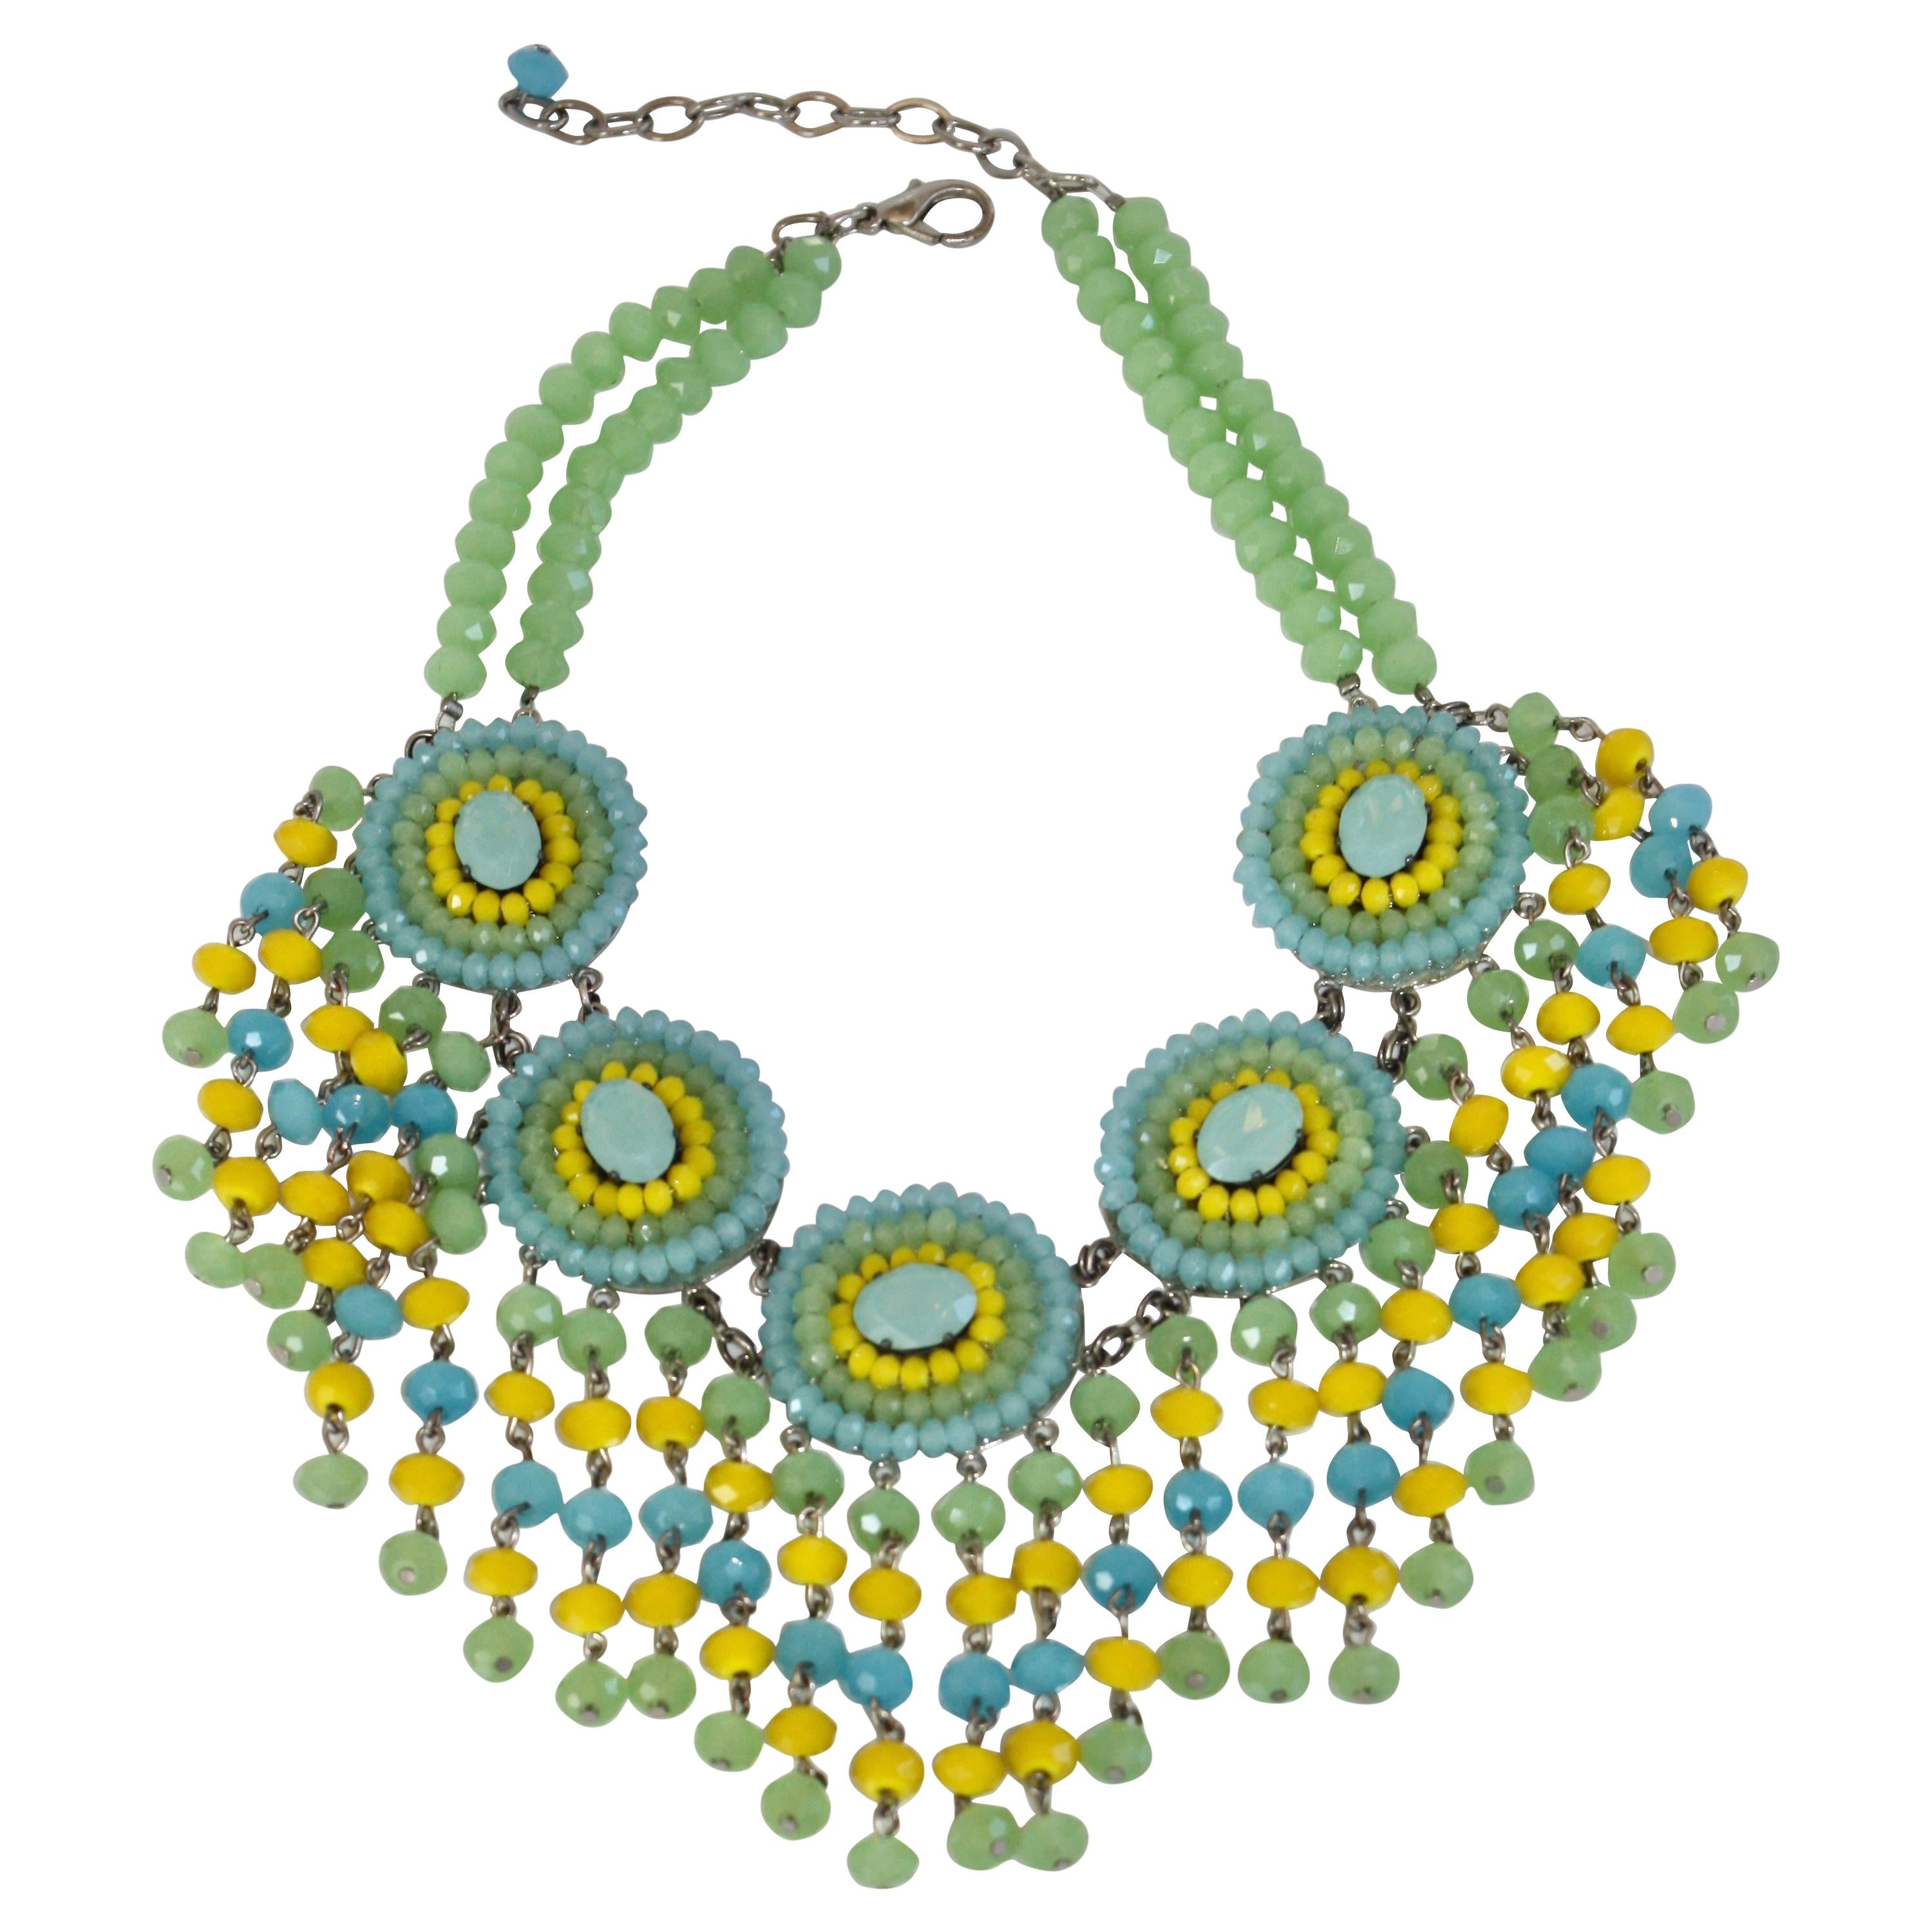 Francoise Montague Handmade Faceted Glass Statement Necklace